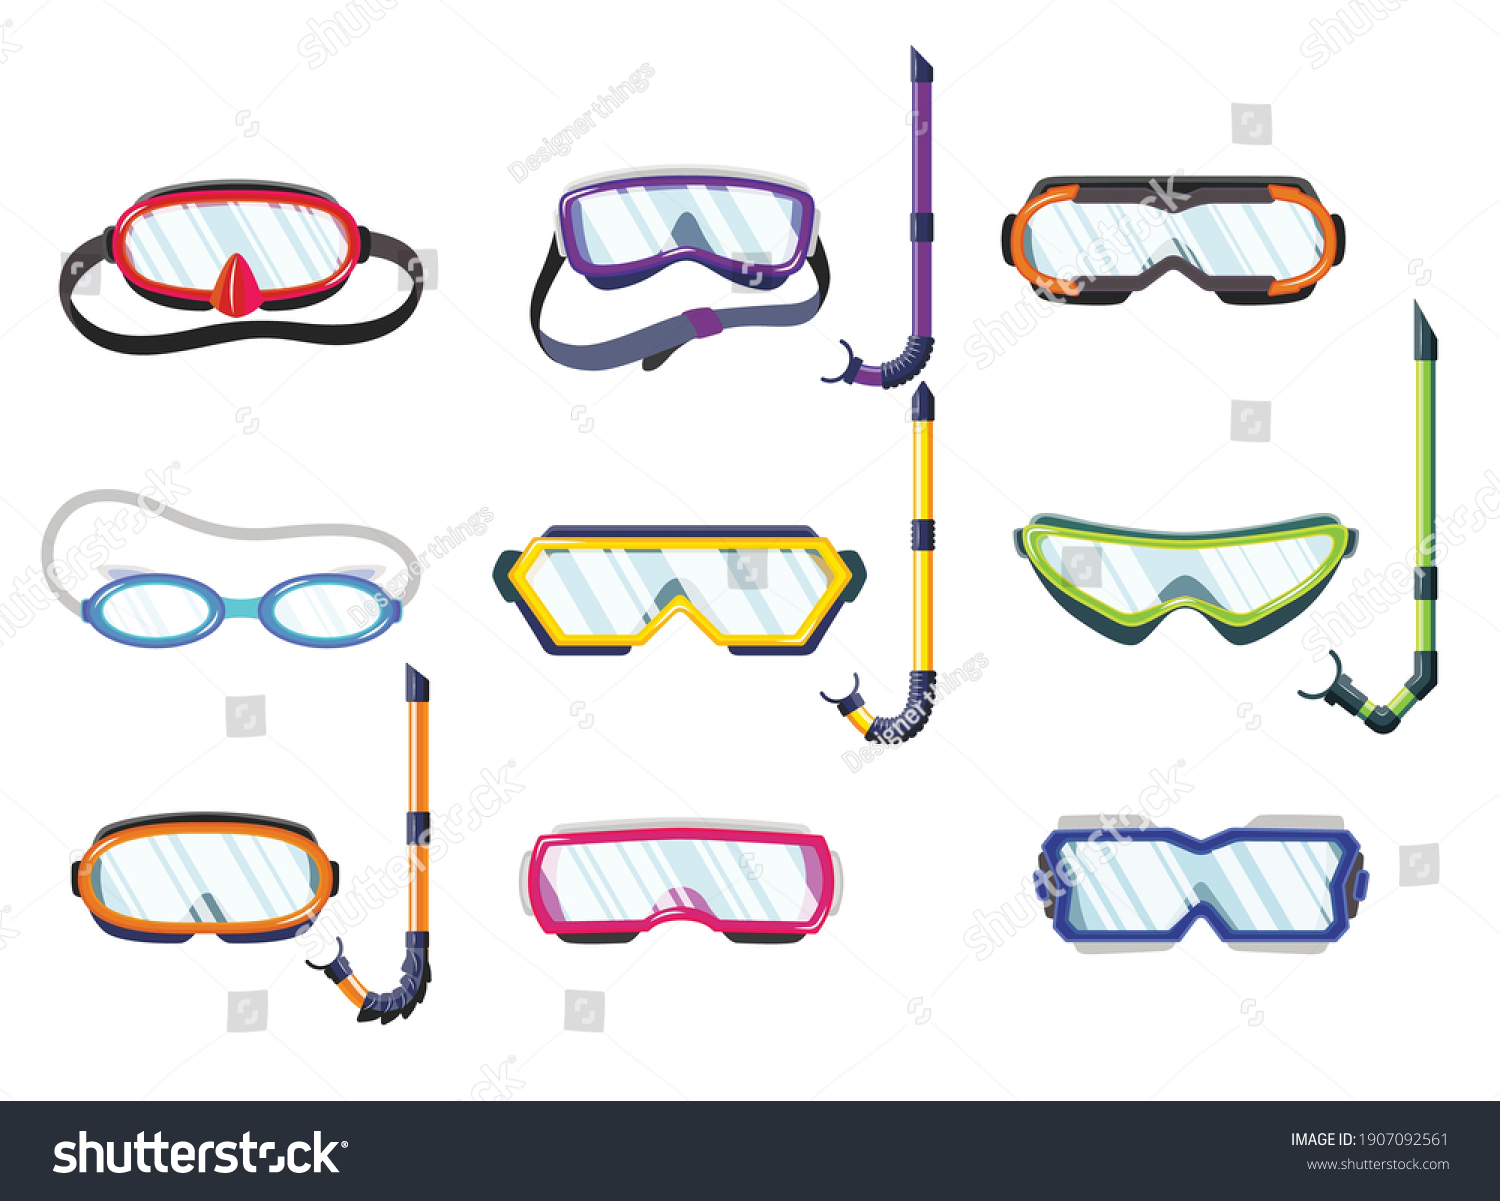 Snorkel Masks Diving Swimming Different Types Stock Vector (Royalty ...